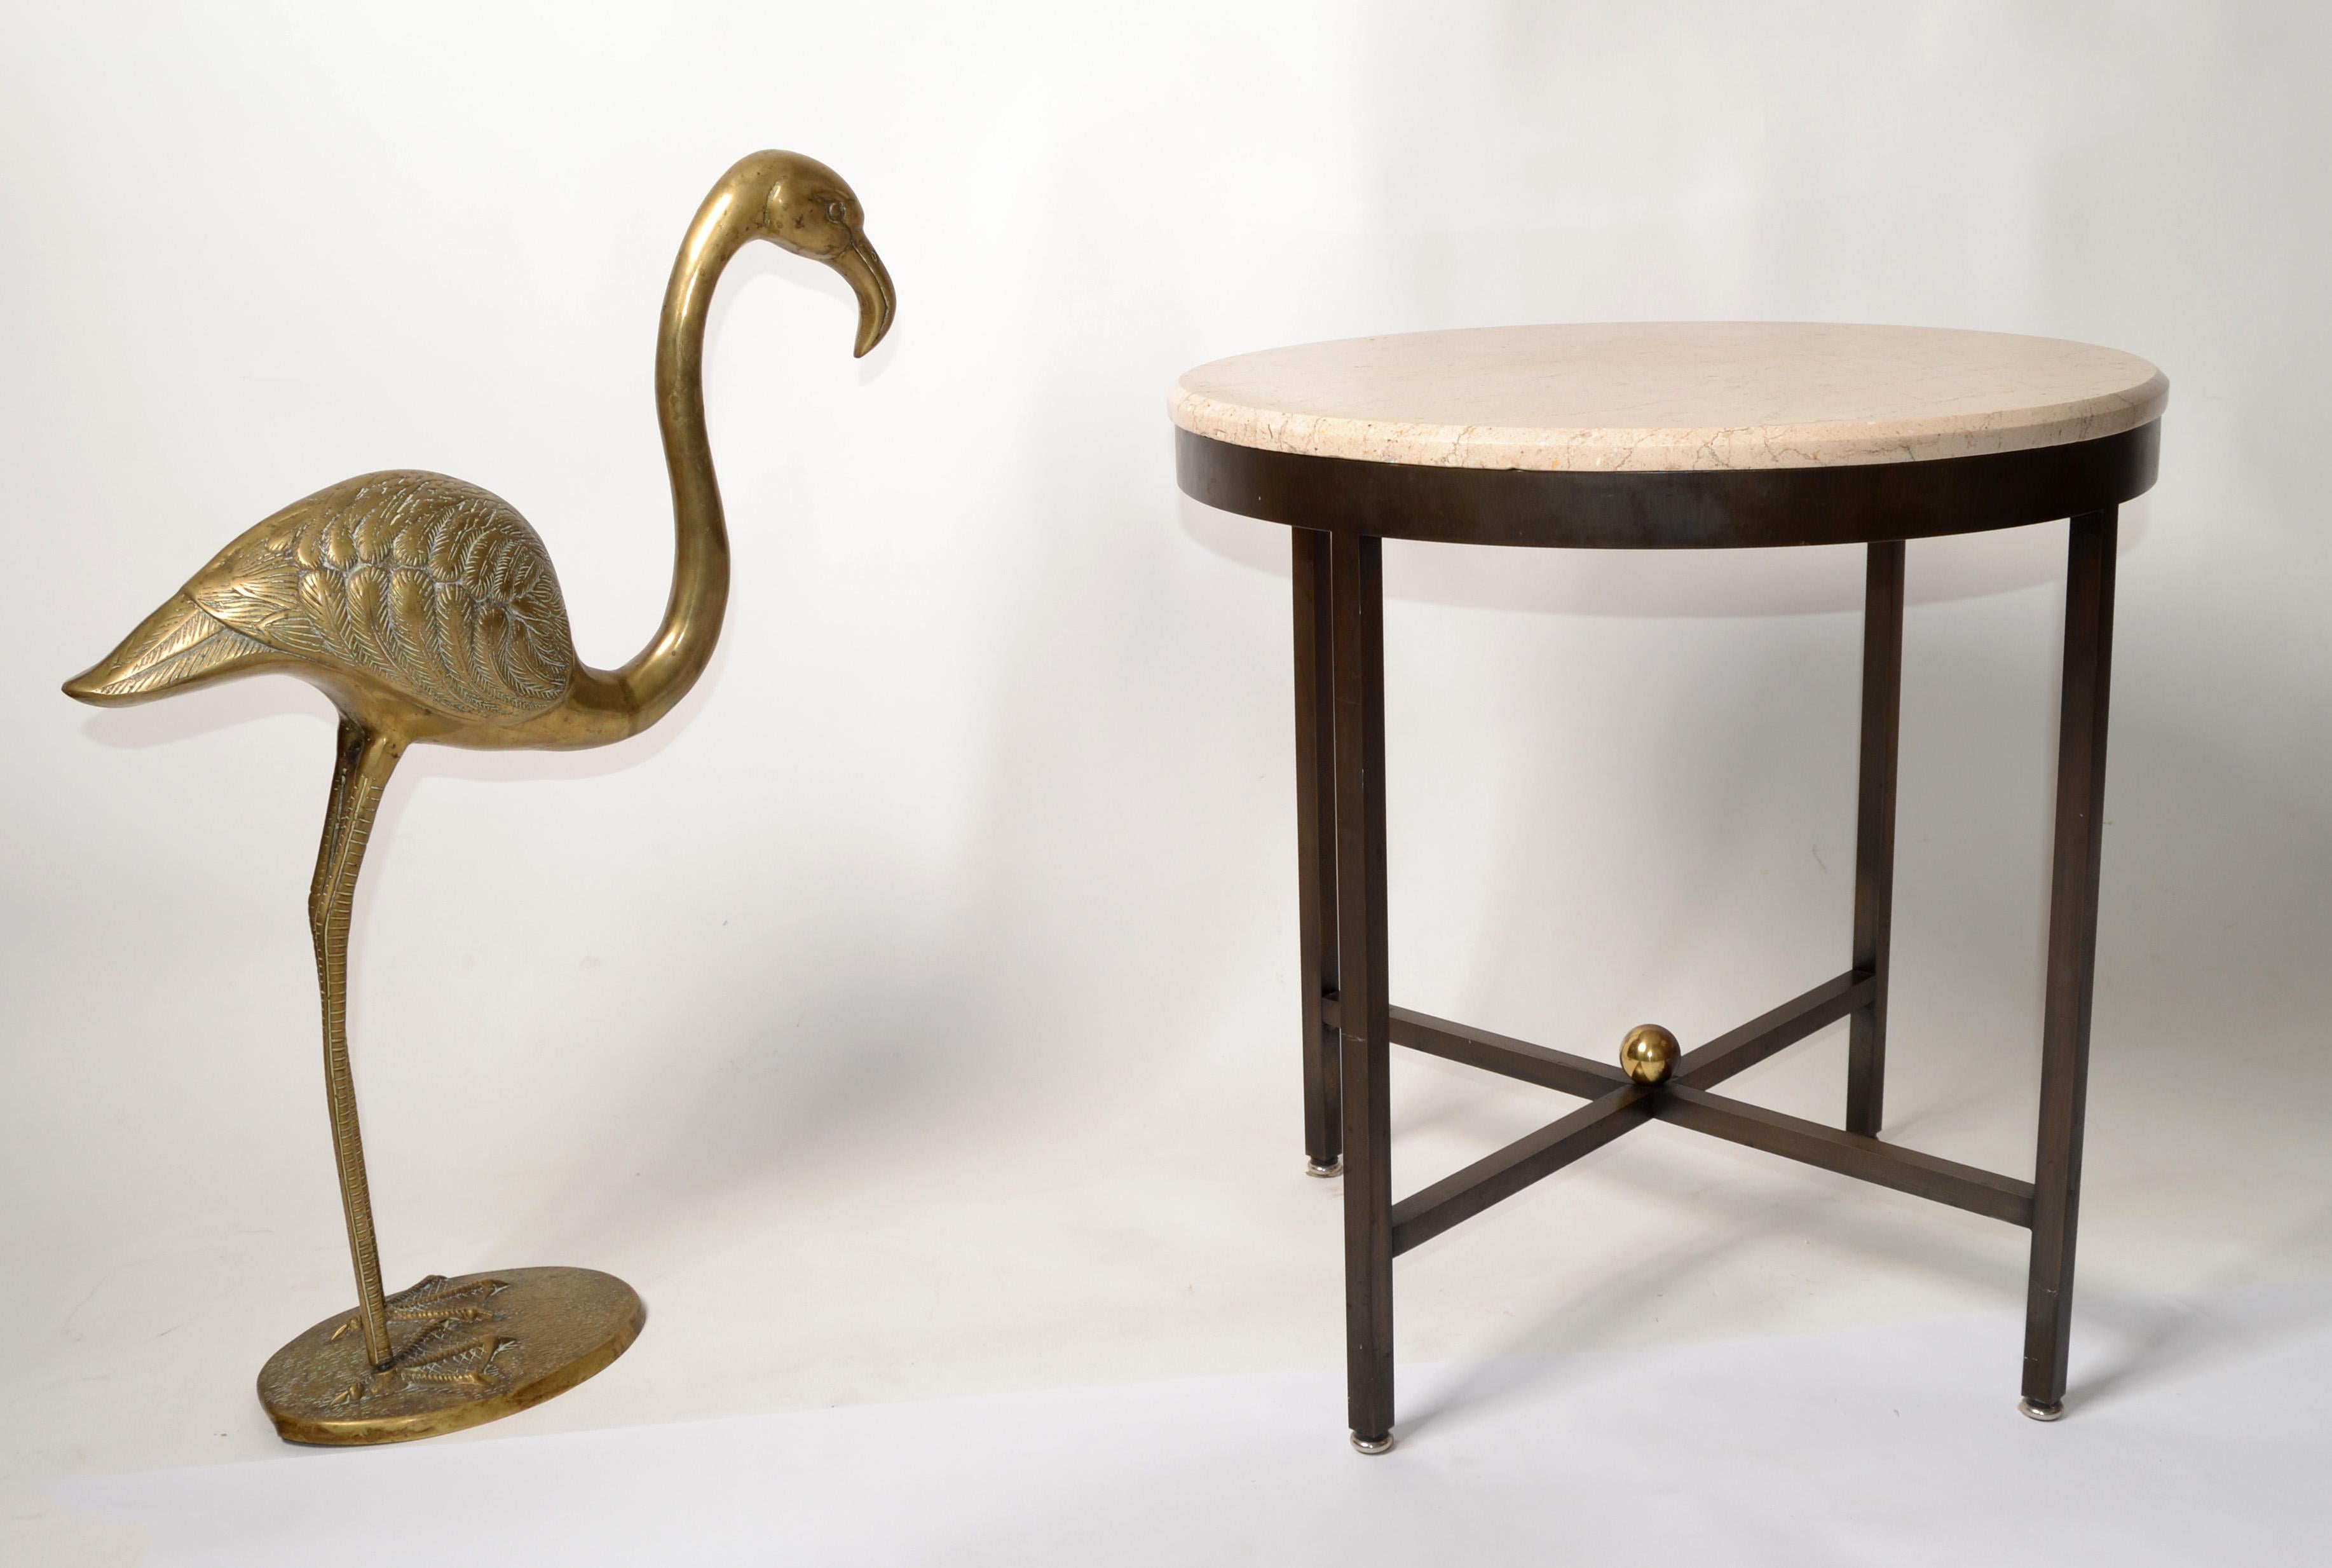 20th Century Solid Brass Carved Flamingo Life-Size Animal Sculpture Outdoor Indoor Asian 1960 For Sale